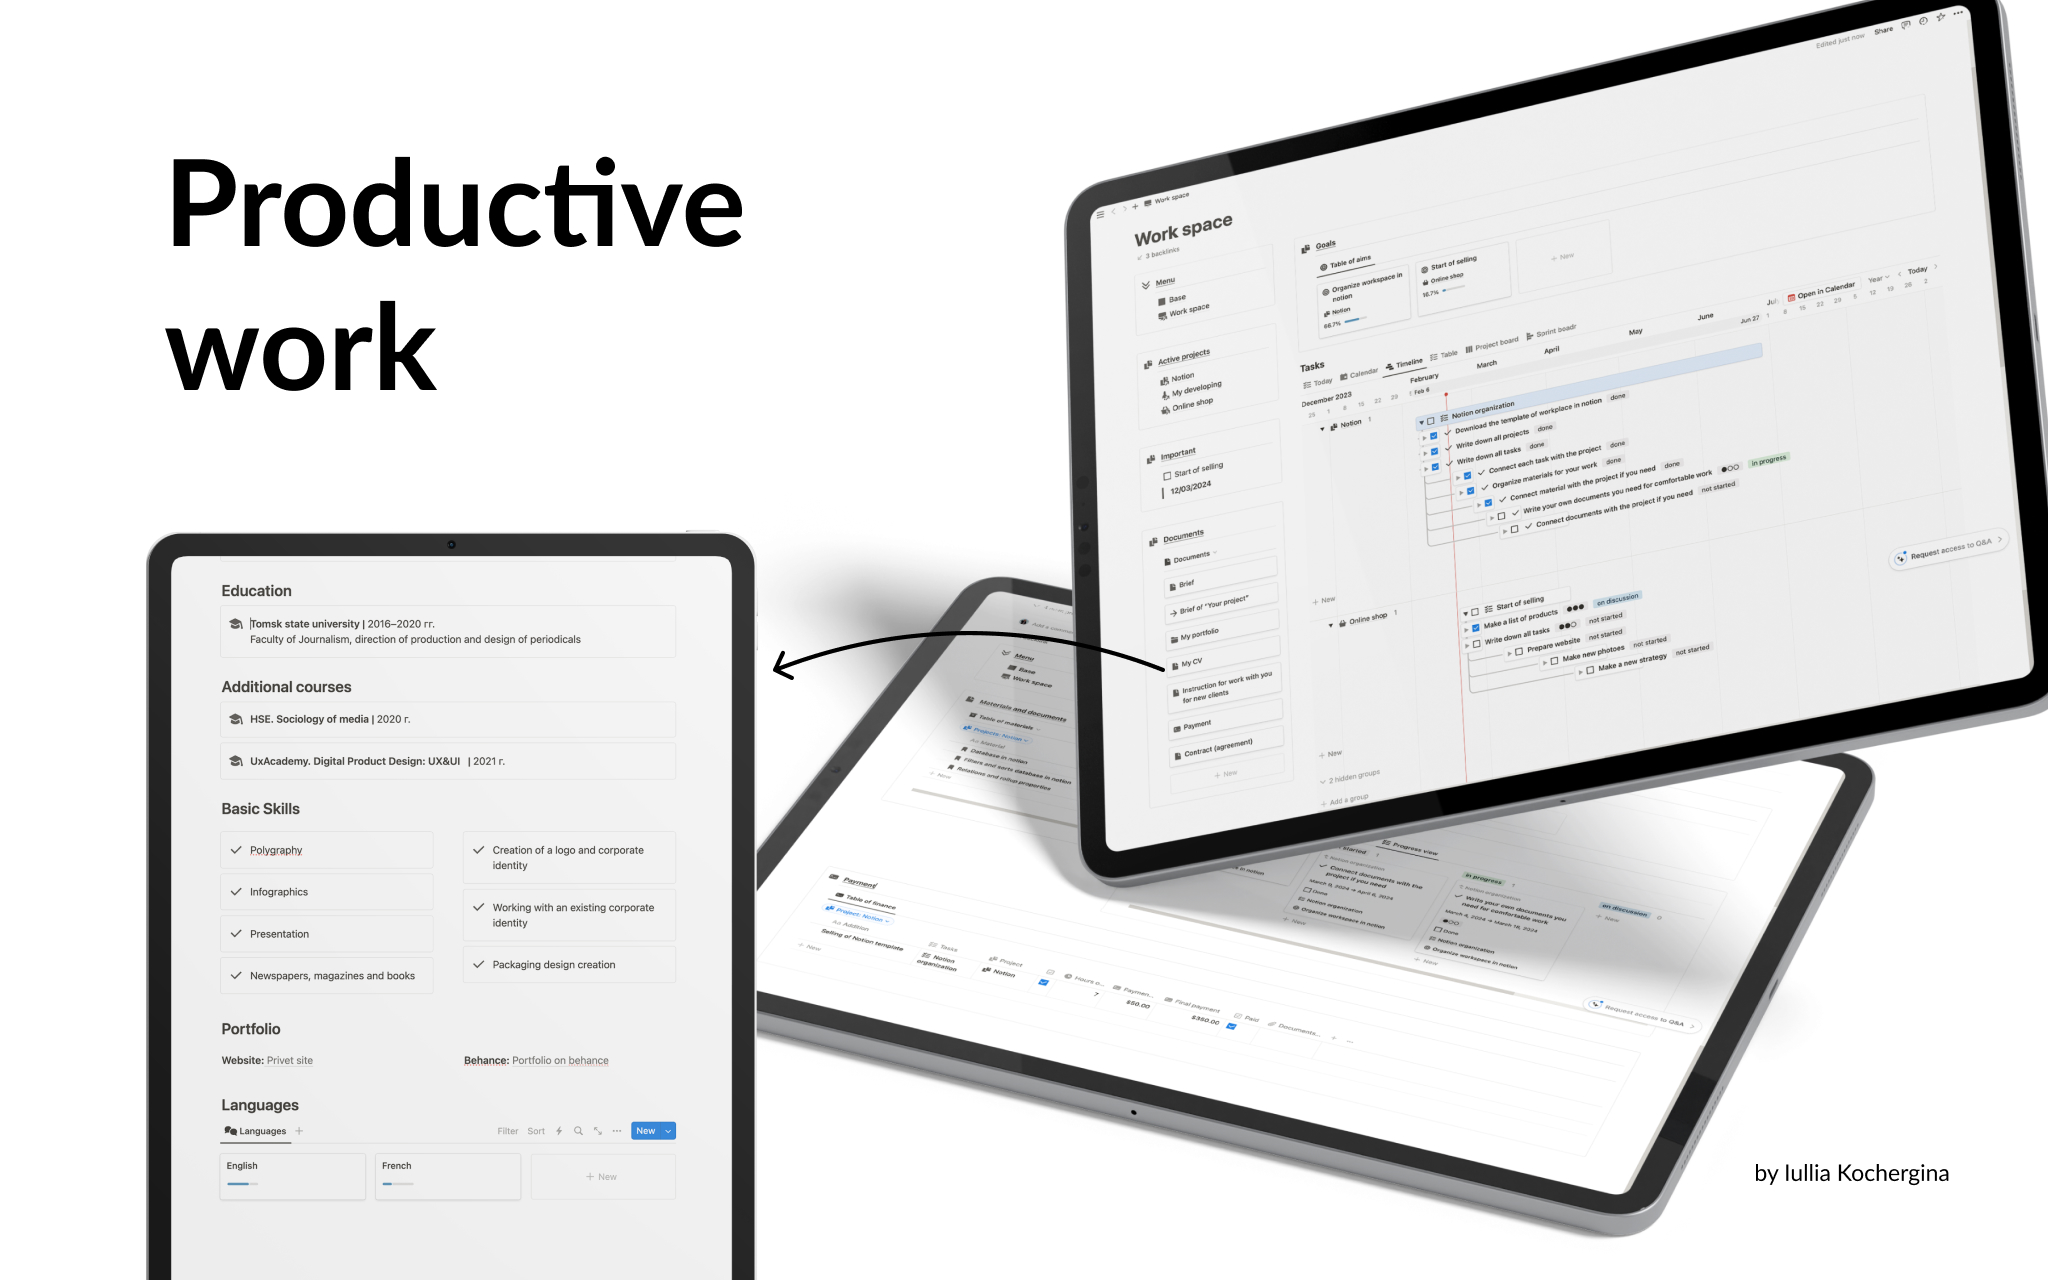 Template for productive work. You can add Projects, Tasks, Documents, Goals and Payment in one place and link it together. There are instructions and template but you can text to me and ask questions. 